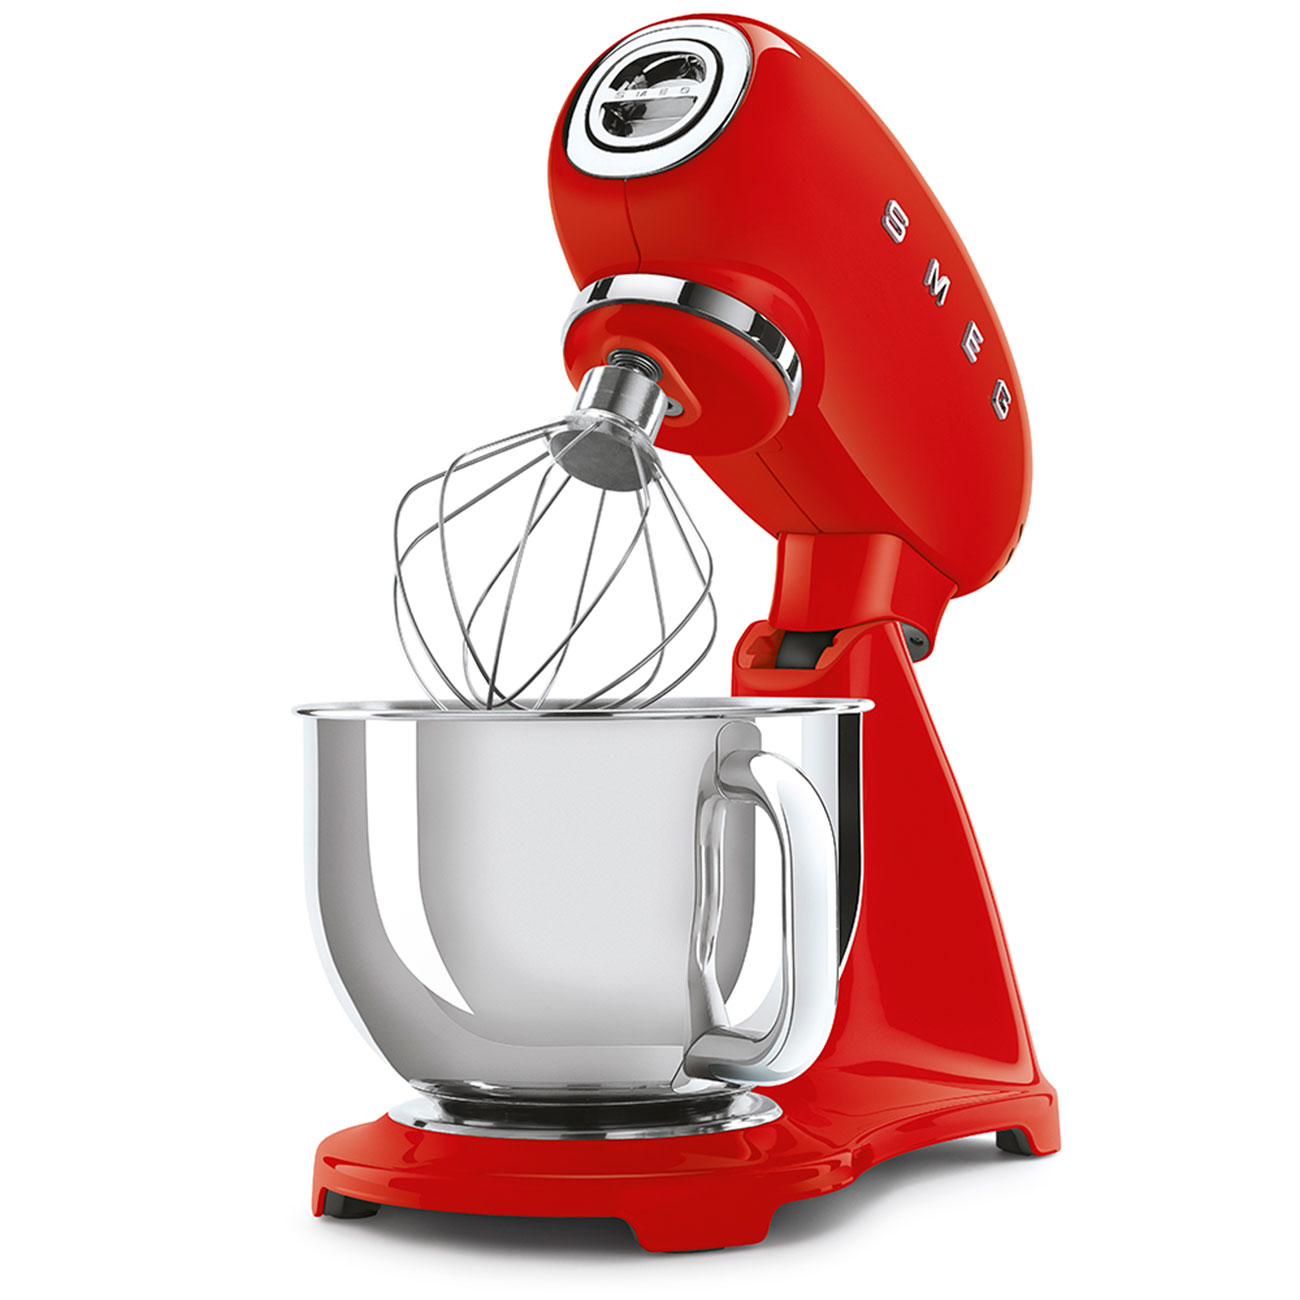 Red Stand mixer full color SMF03RDSA Smeg_2